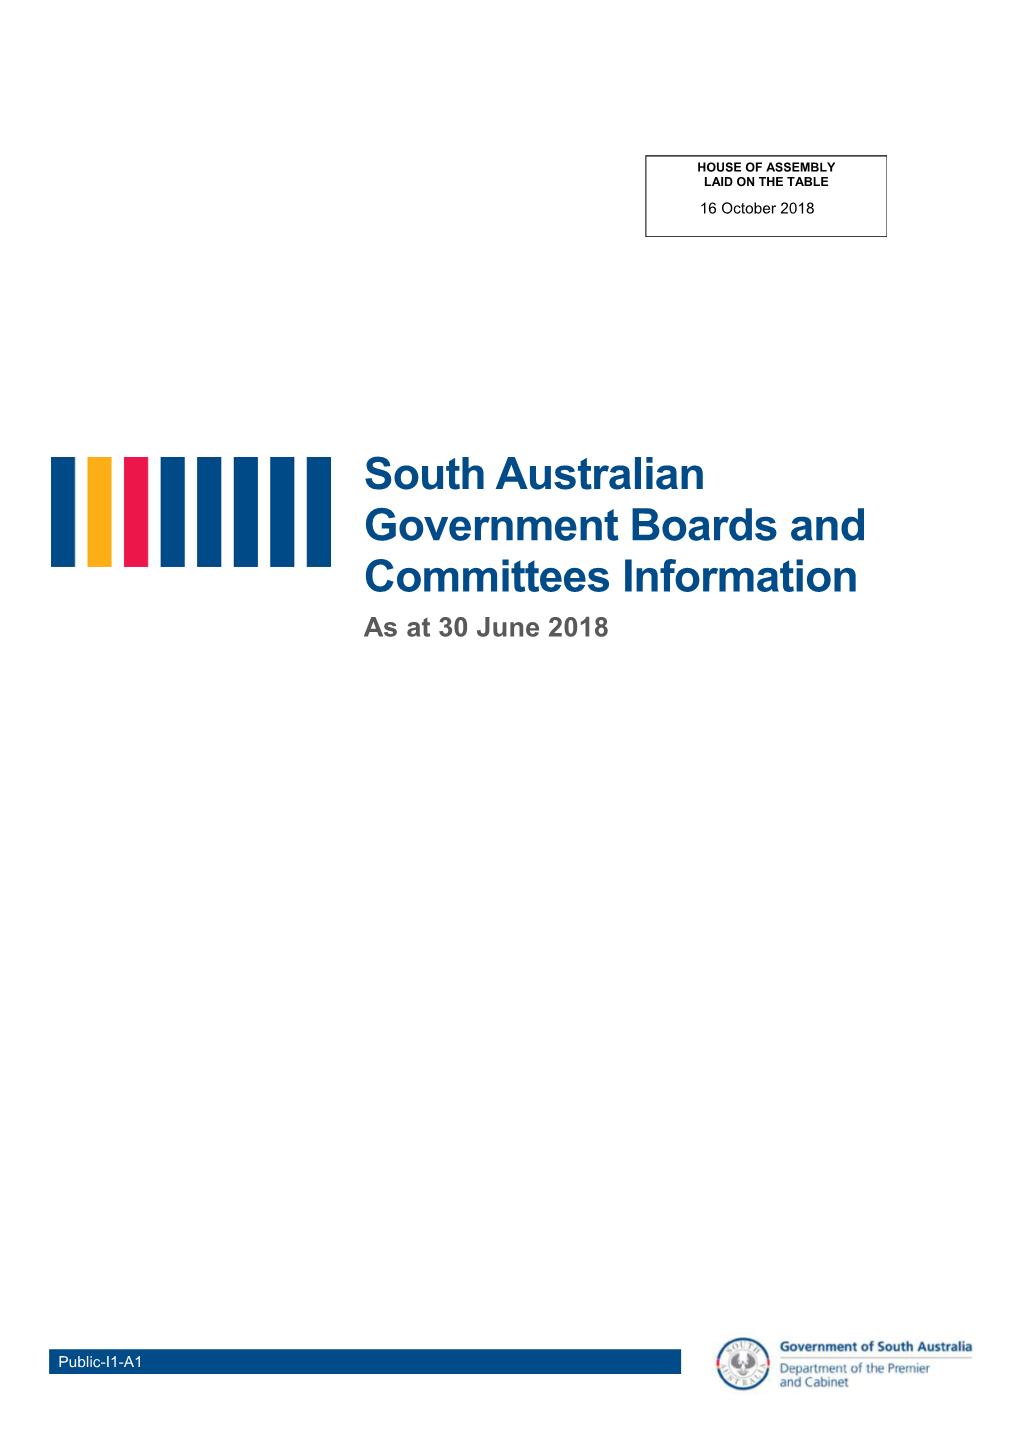 South Australian Government Boards and Committees Information As at 30 June 2018